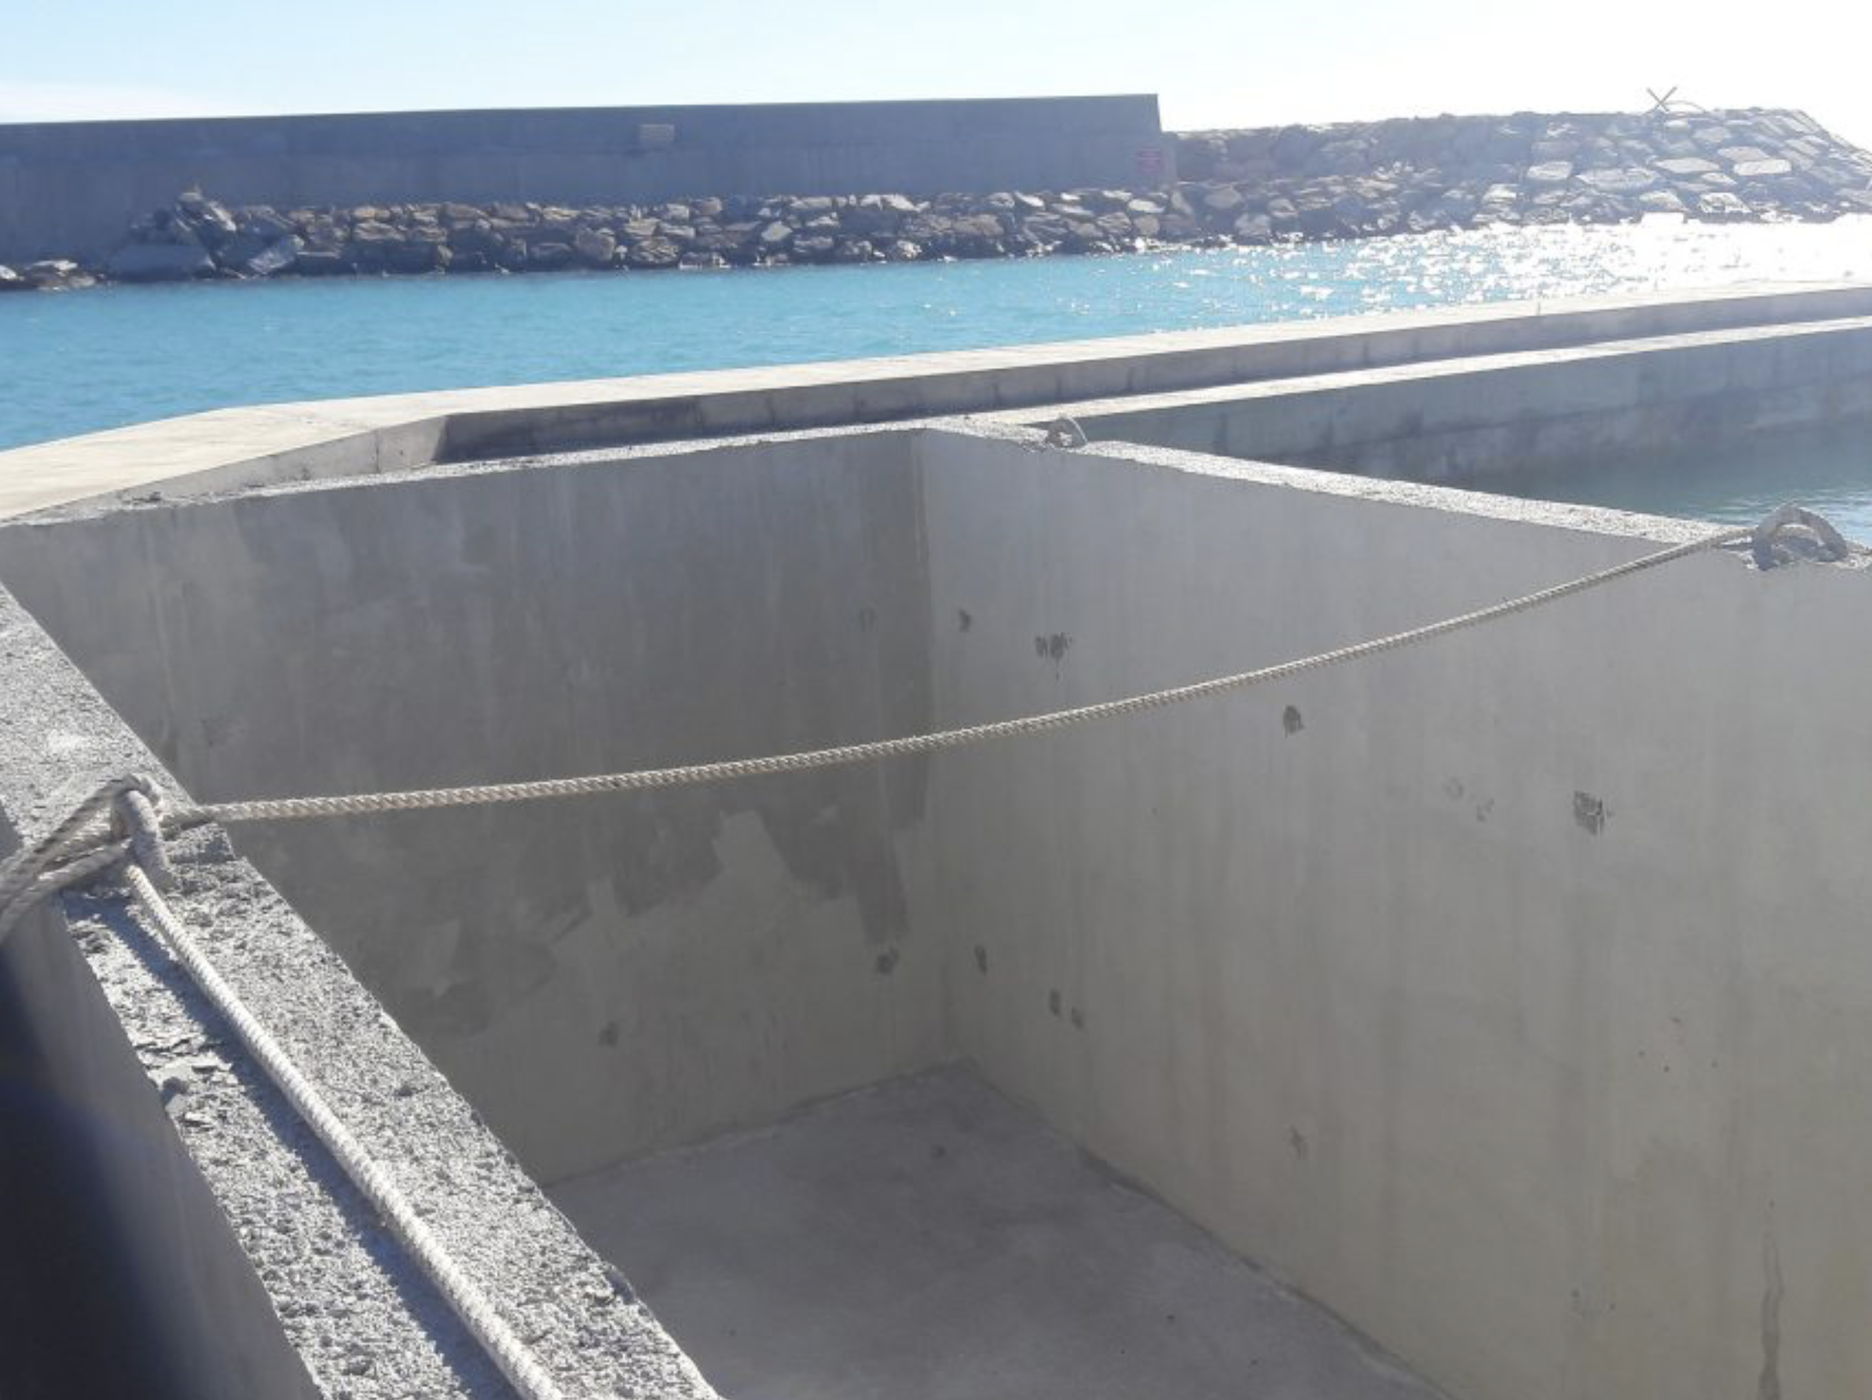 Ensuring concrete durability: PENETRON ADMIX generates a non-soluble crystalline formation in concrete to seals microcracks, pores and capillaries against the penetration of seawater and moisture.